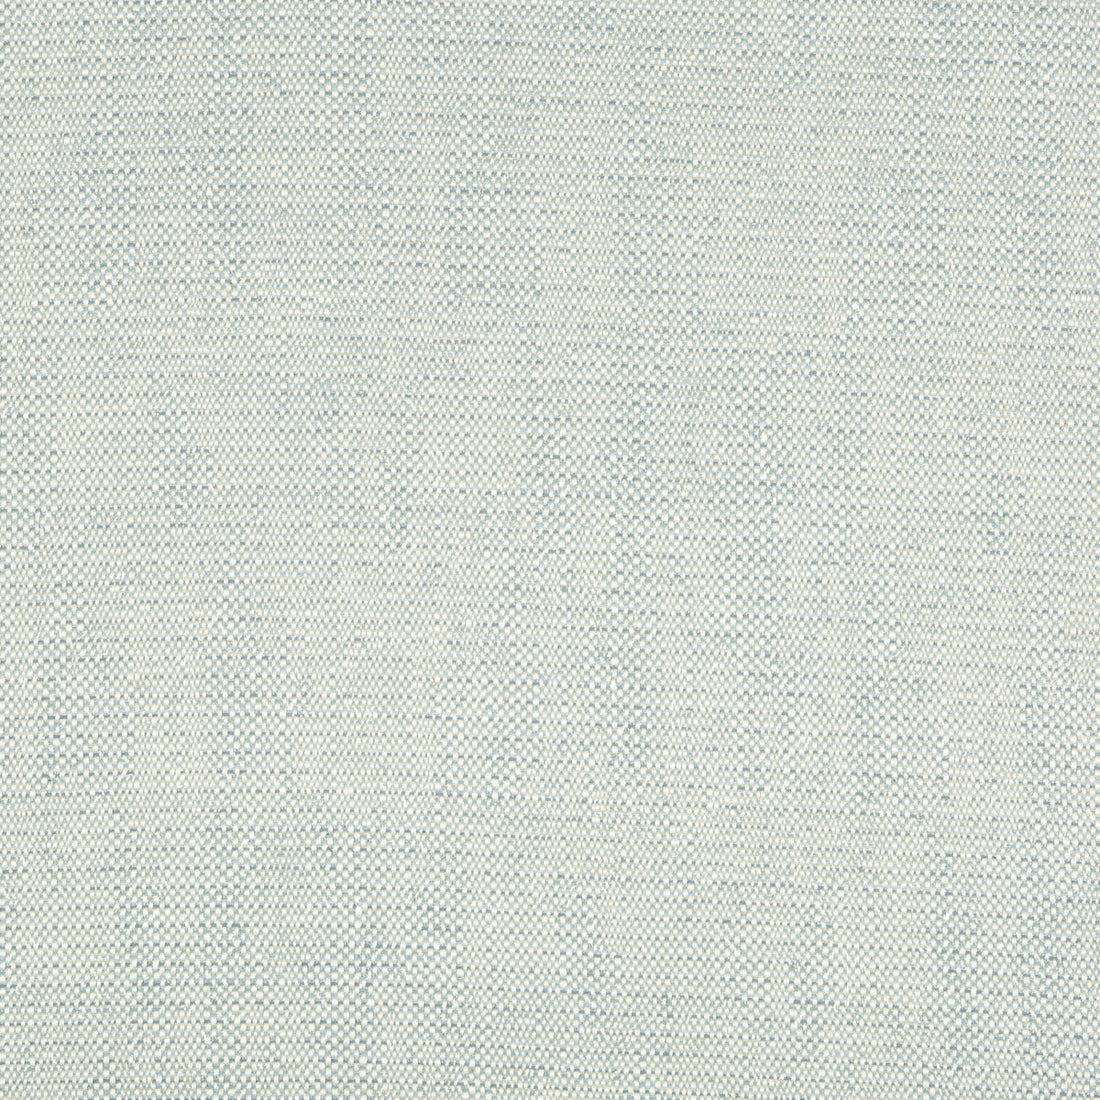 Kravet Contract fabric in 34768-15 color - pattern 34768.15.0 - by Kravet Contract in the Gis collection